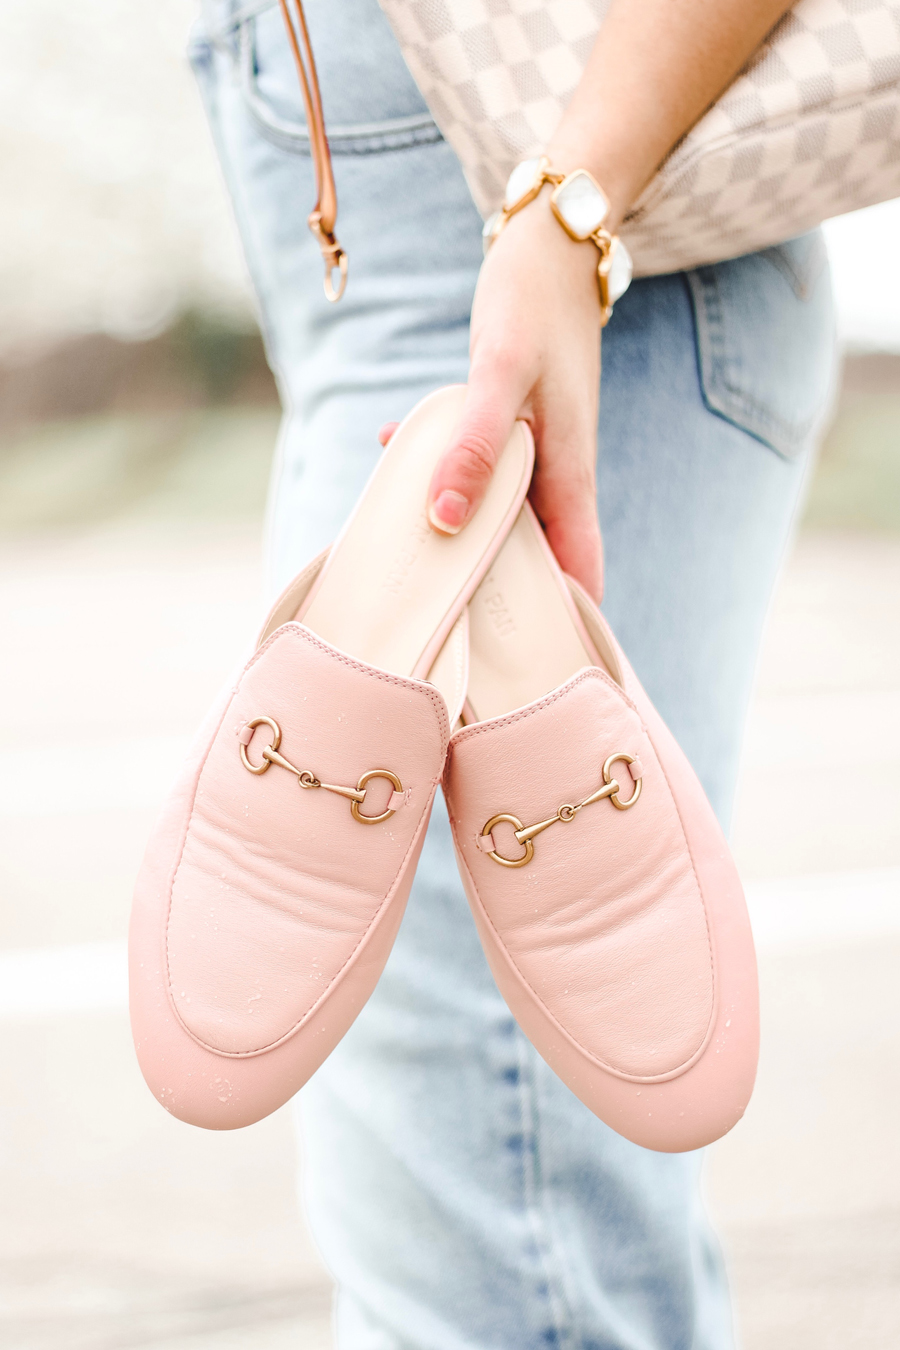 gucci-loafer-dupes-4-900